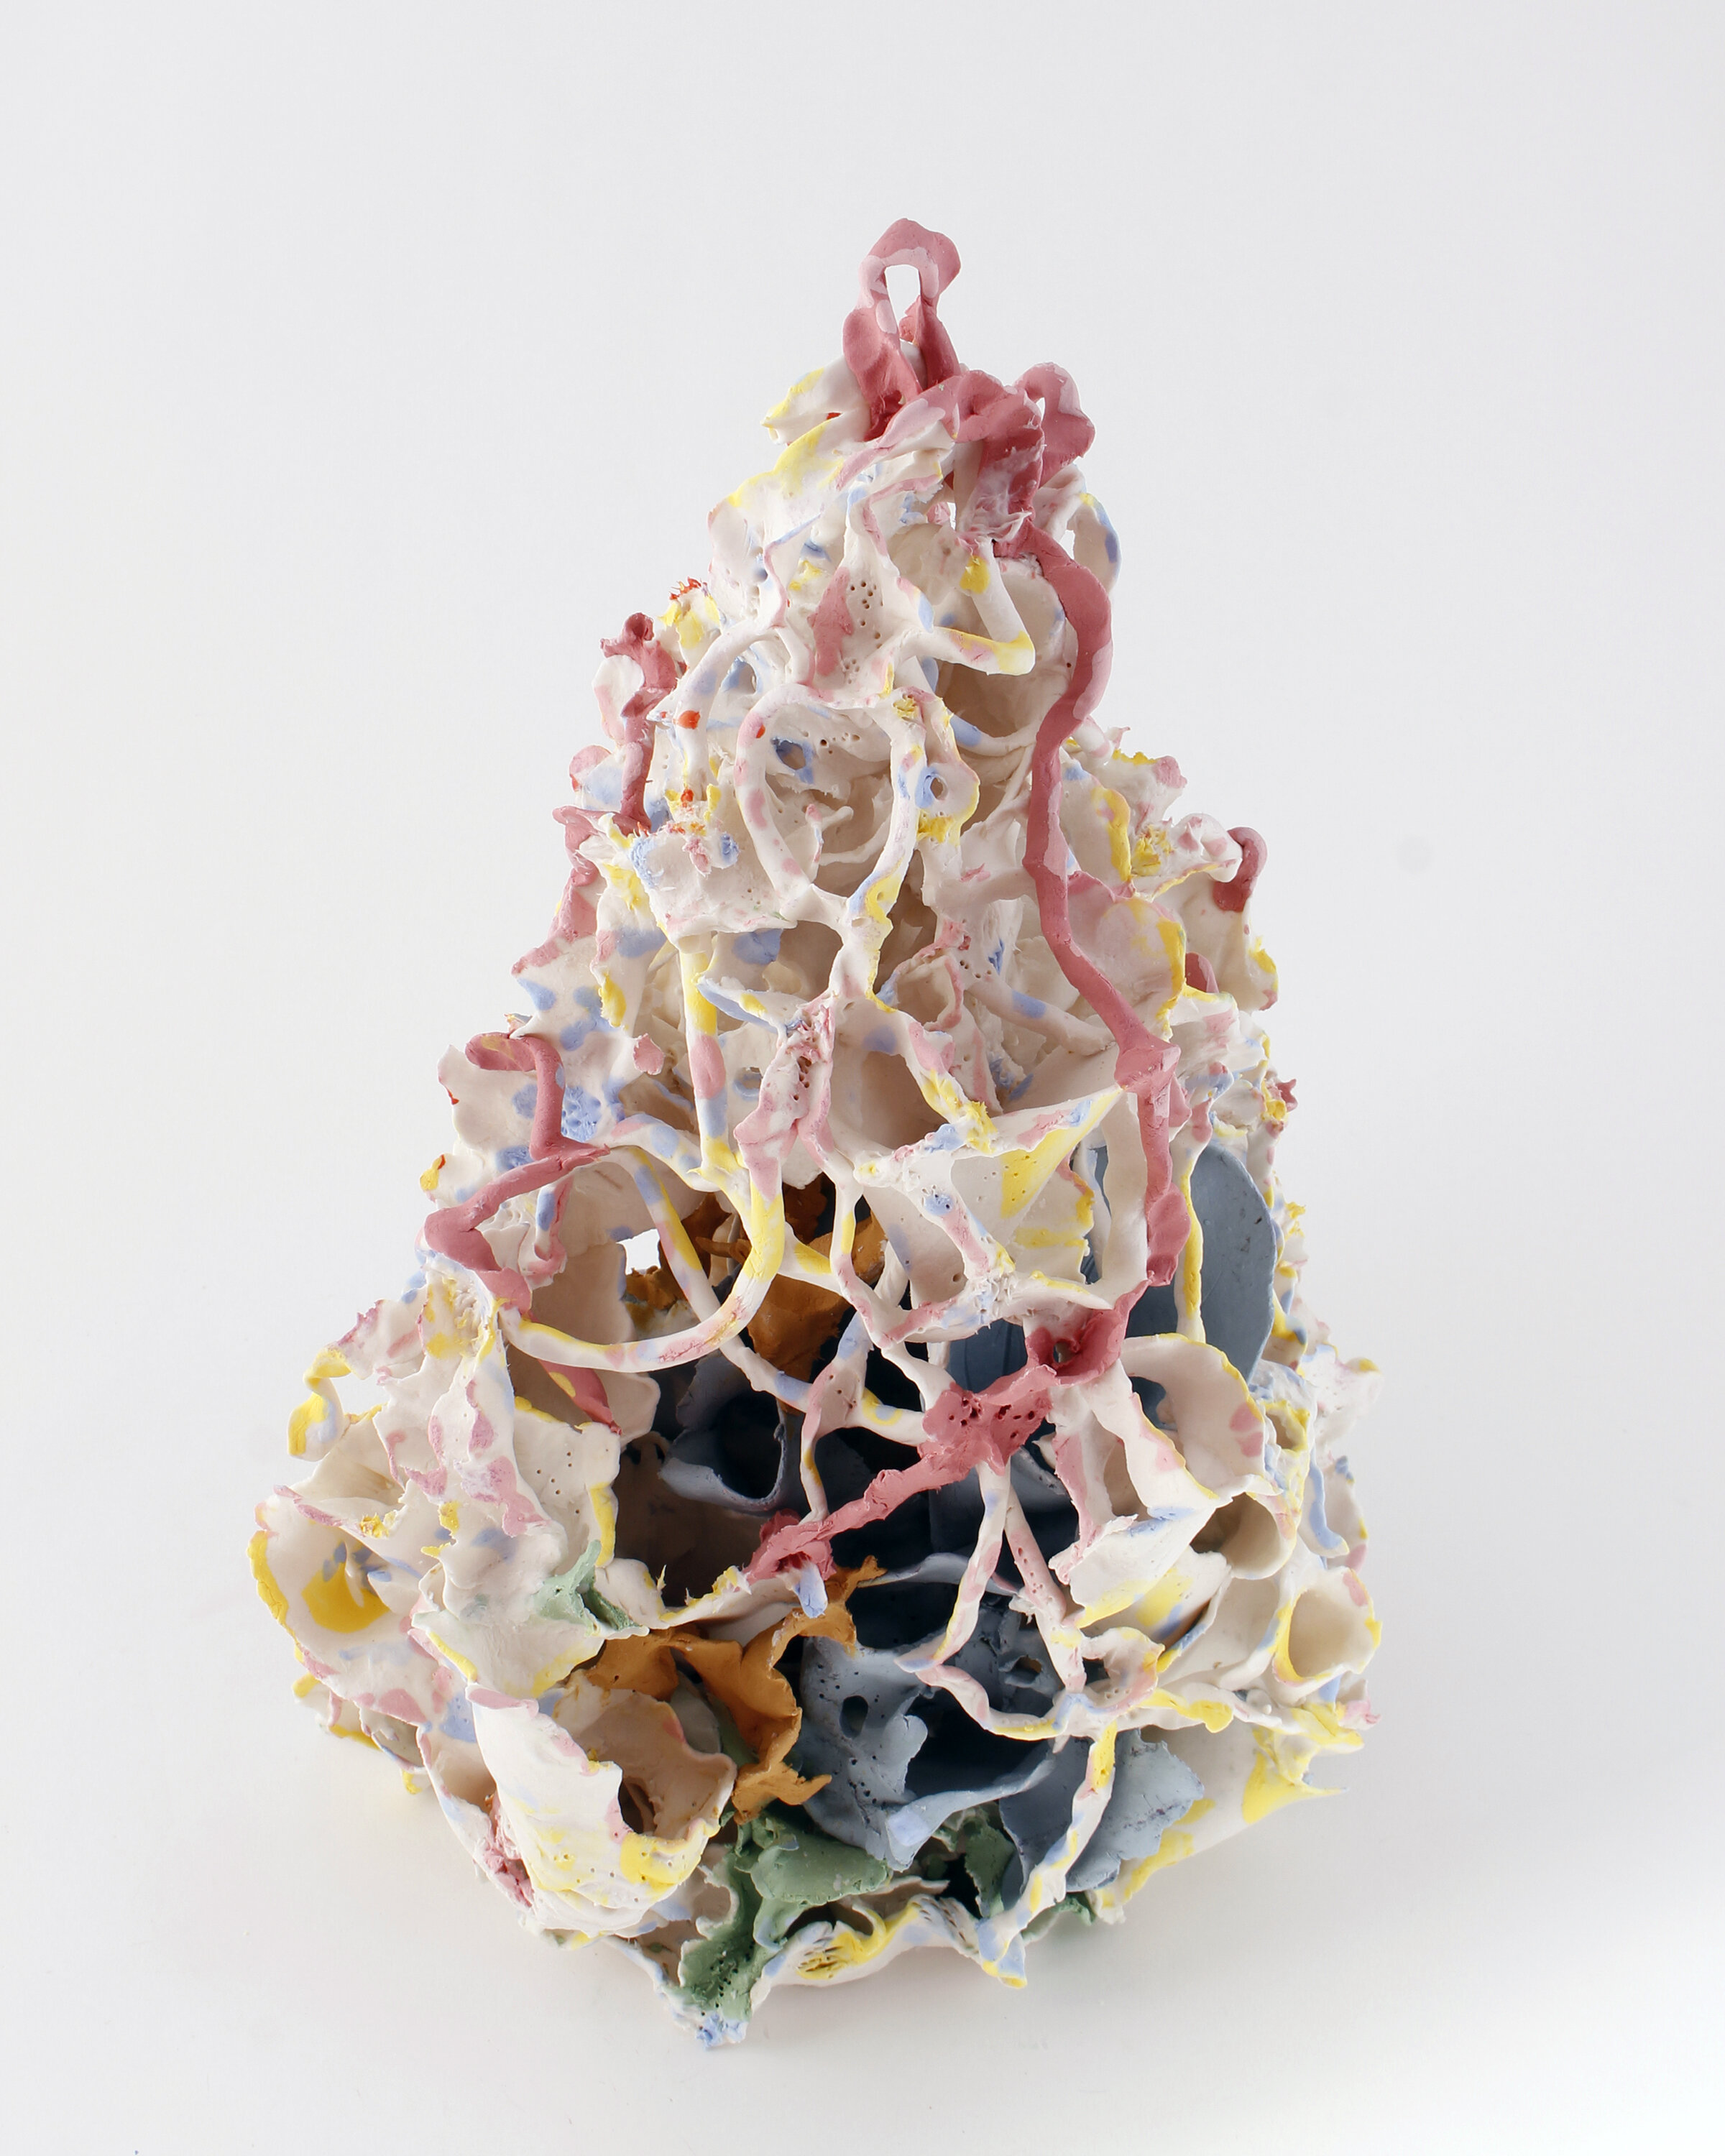  Renqian Yang,  Sonder , 2021. Colored porcelain paper clay with glaze, 16 x 11 x 10 inches. ©Renqian Yang, courtesy of Fou Gallery 